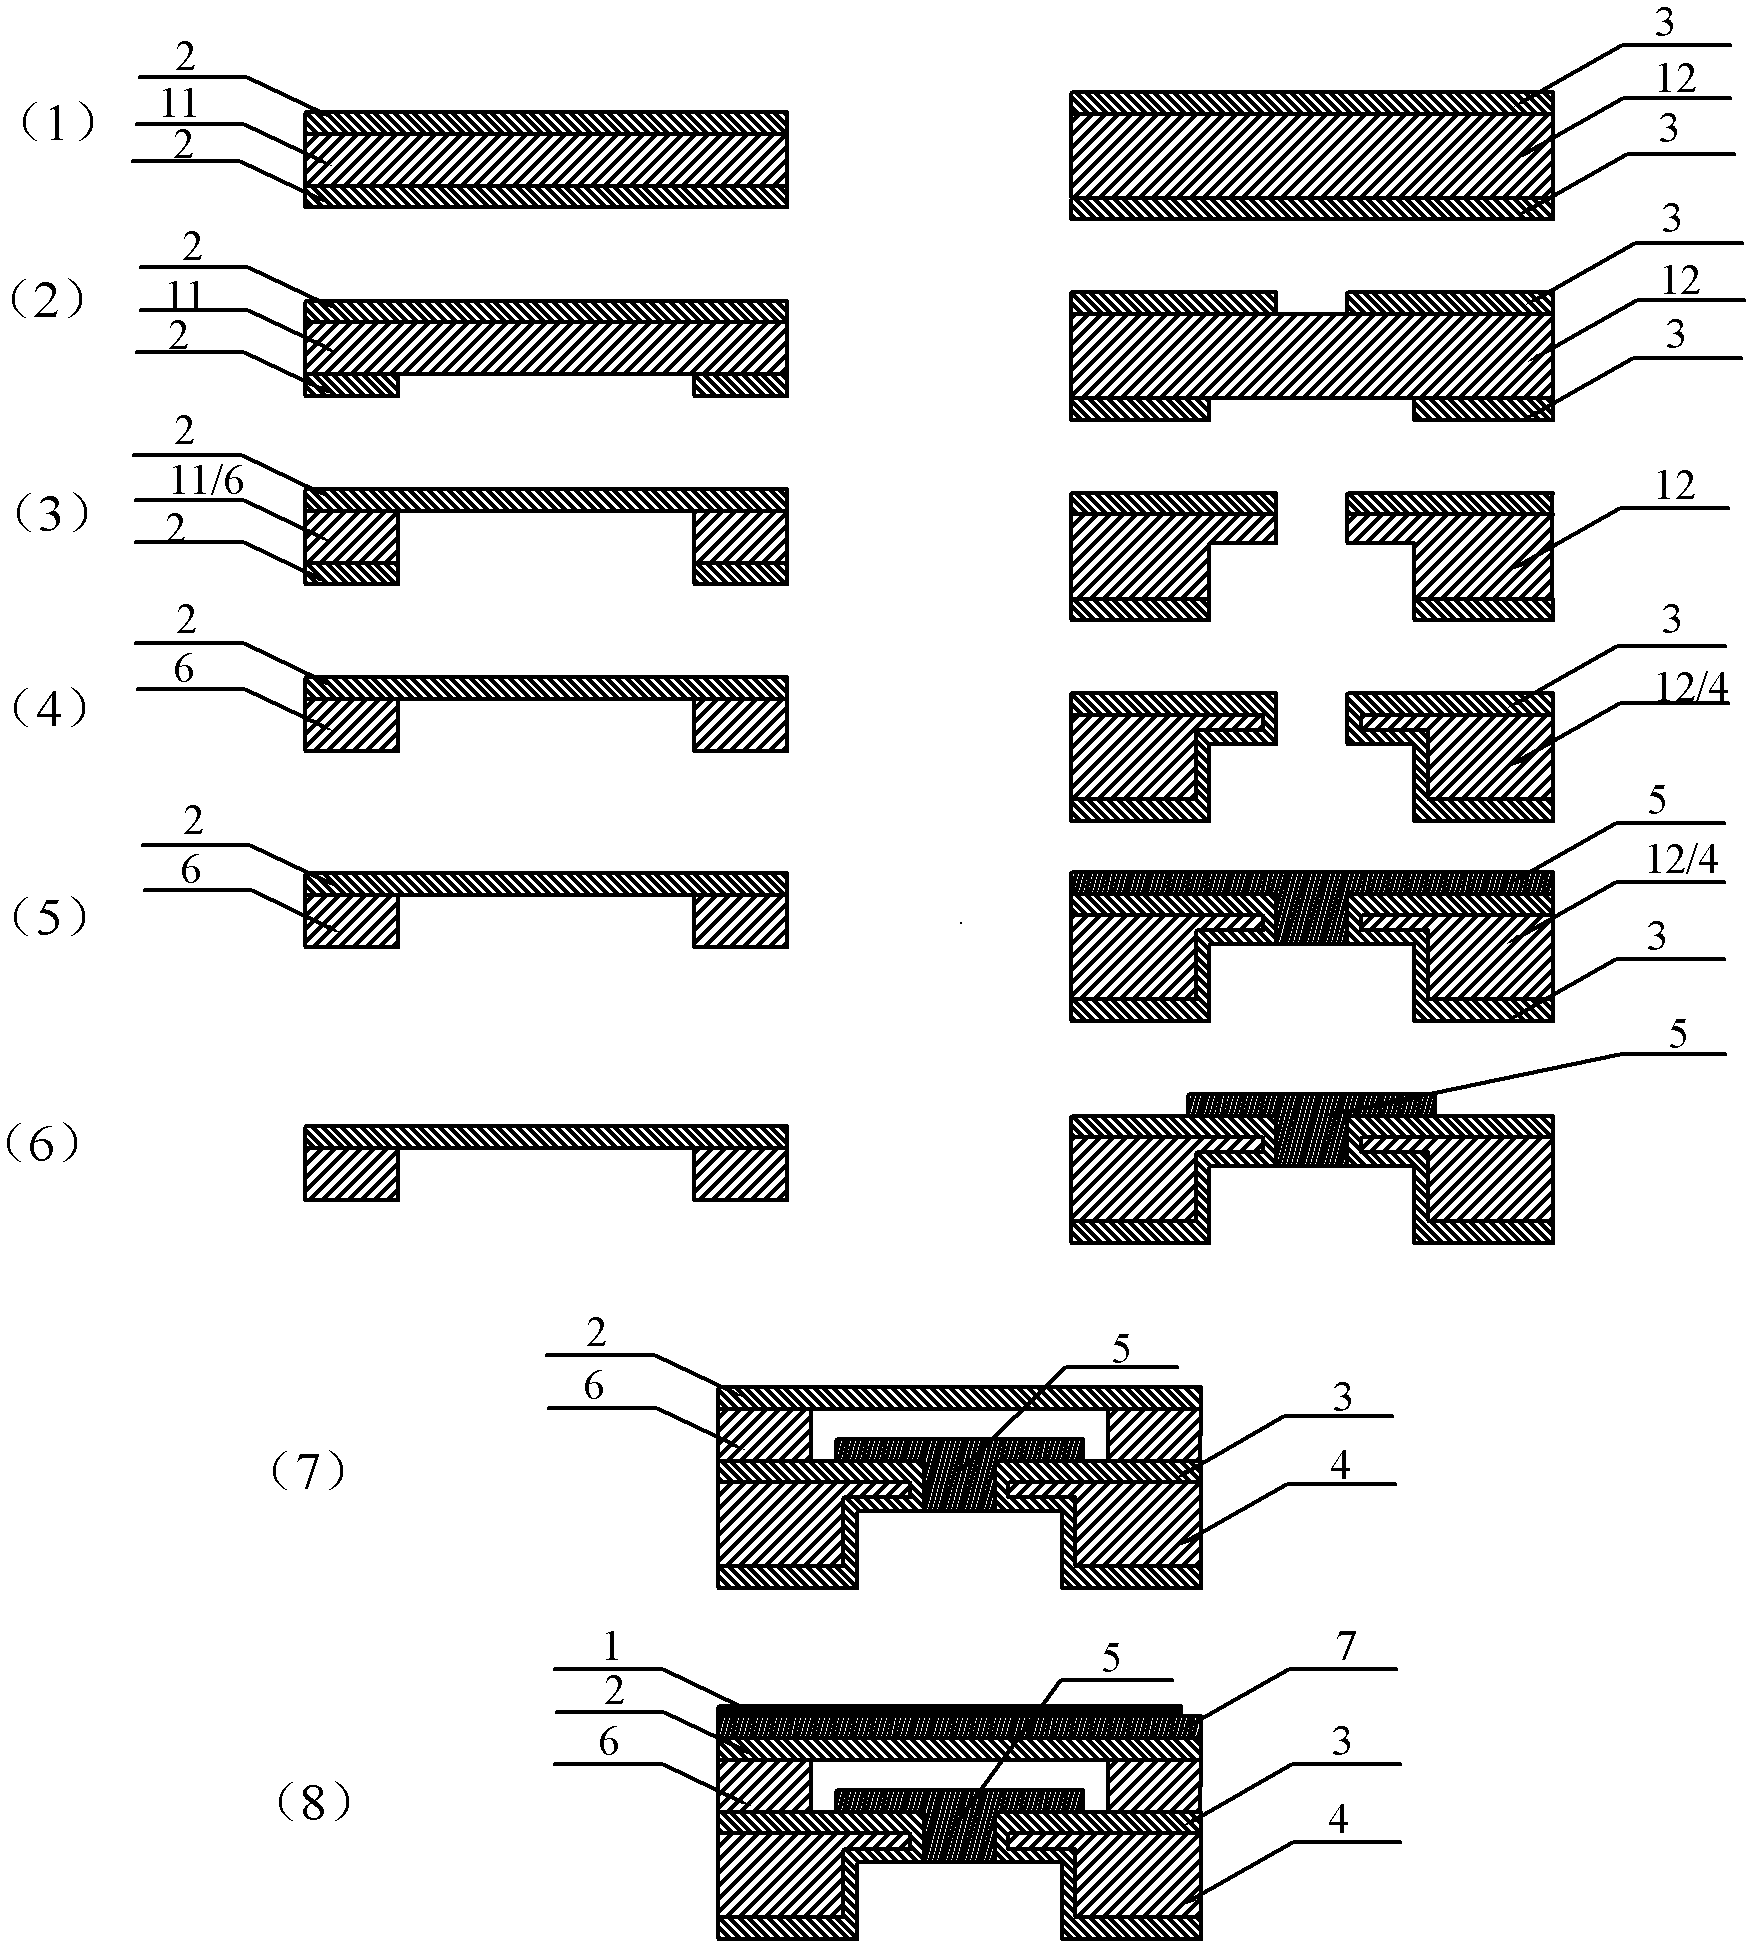 CMUT (Capacitive Micromachined Ultrasonic Transducer)-based biochemical transducer and manufacturing method thereof